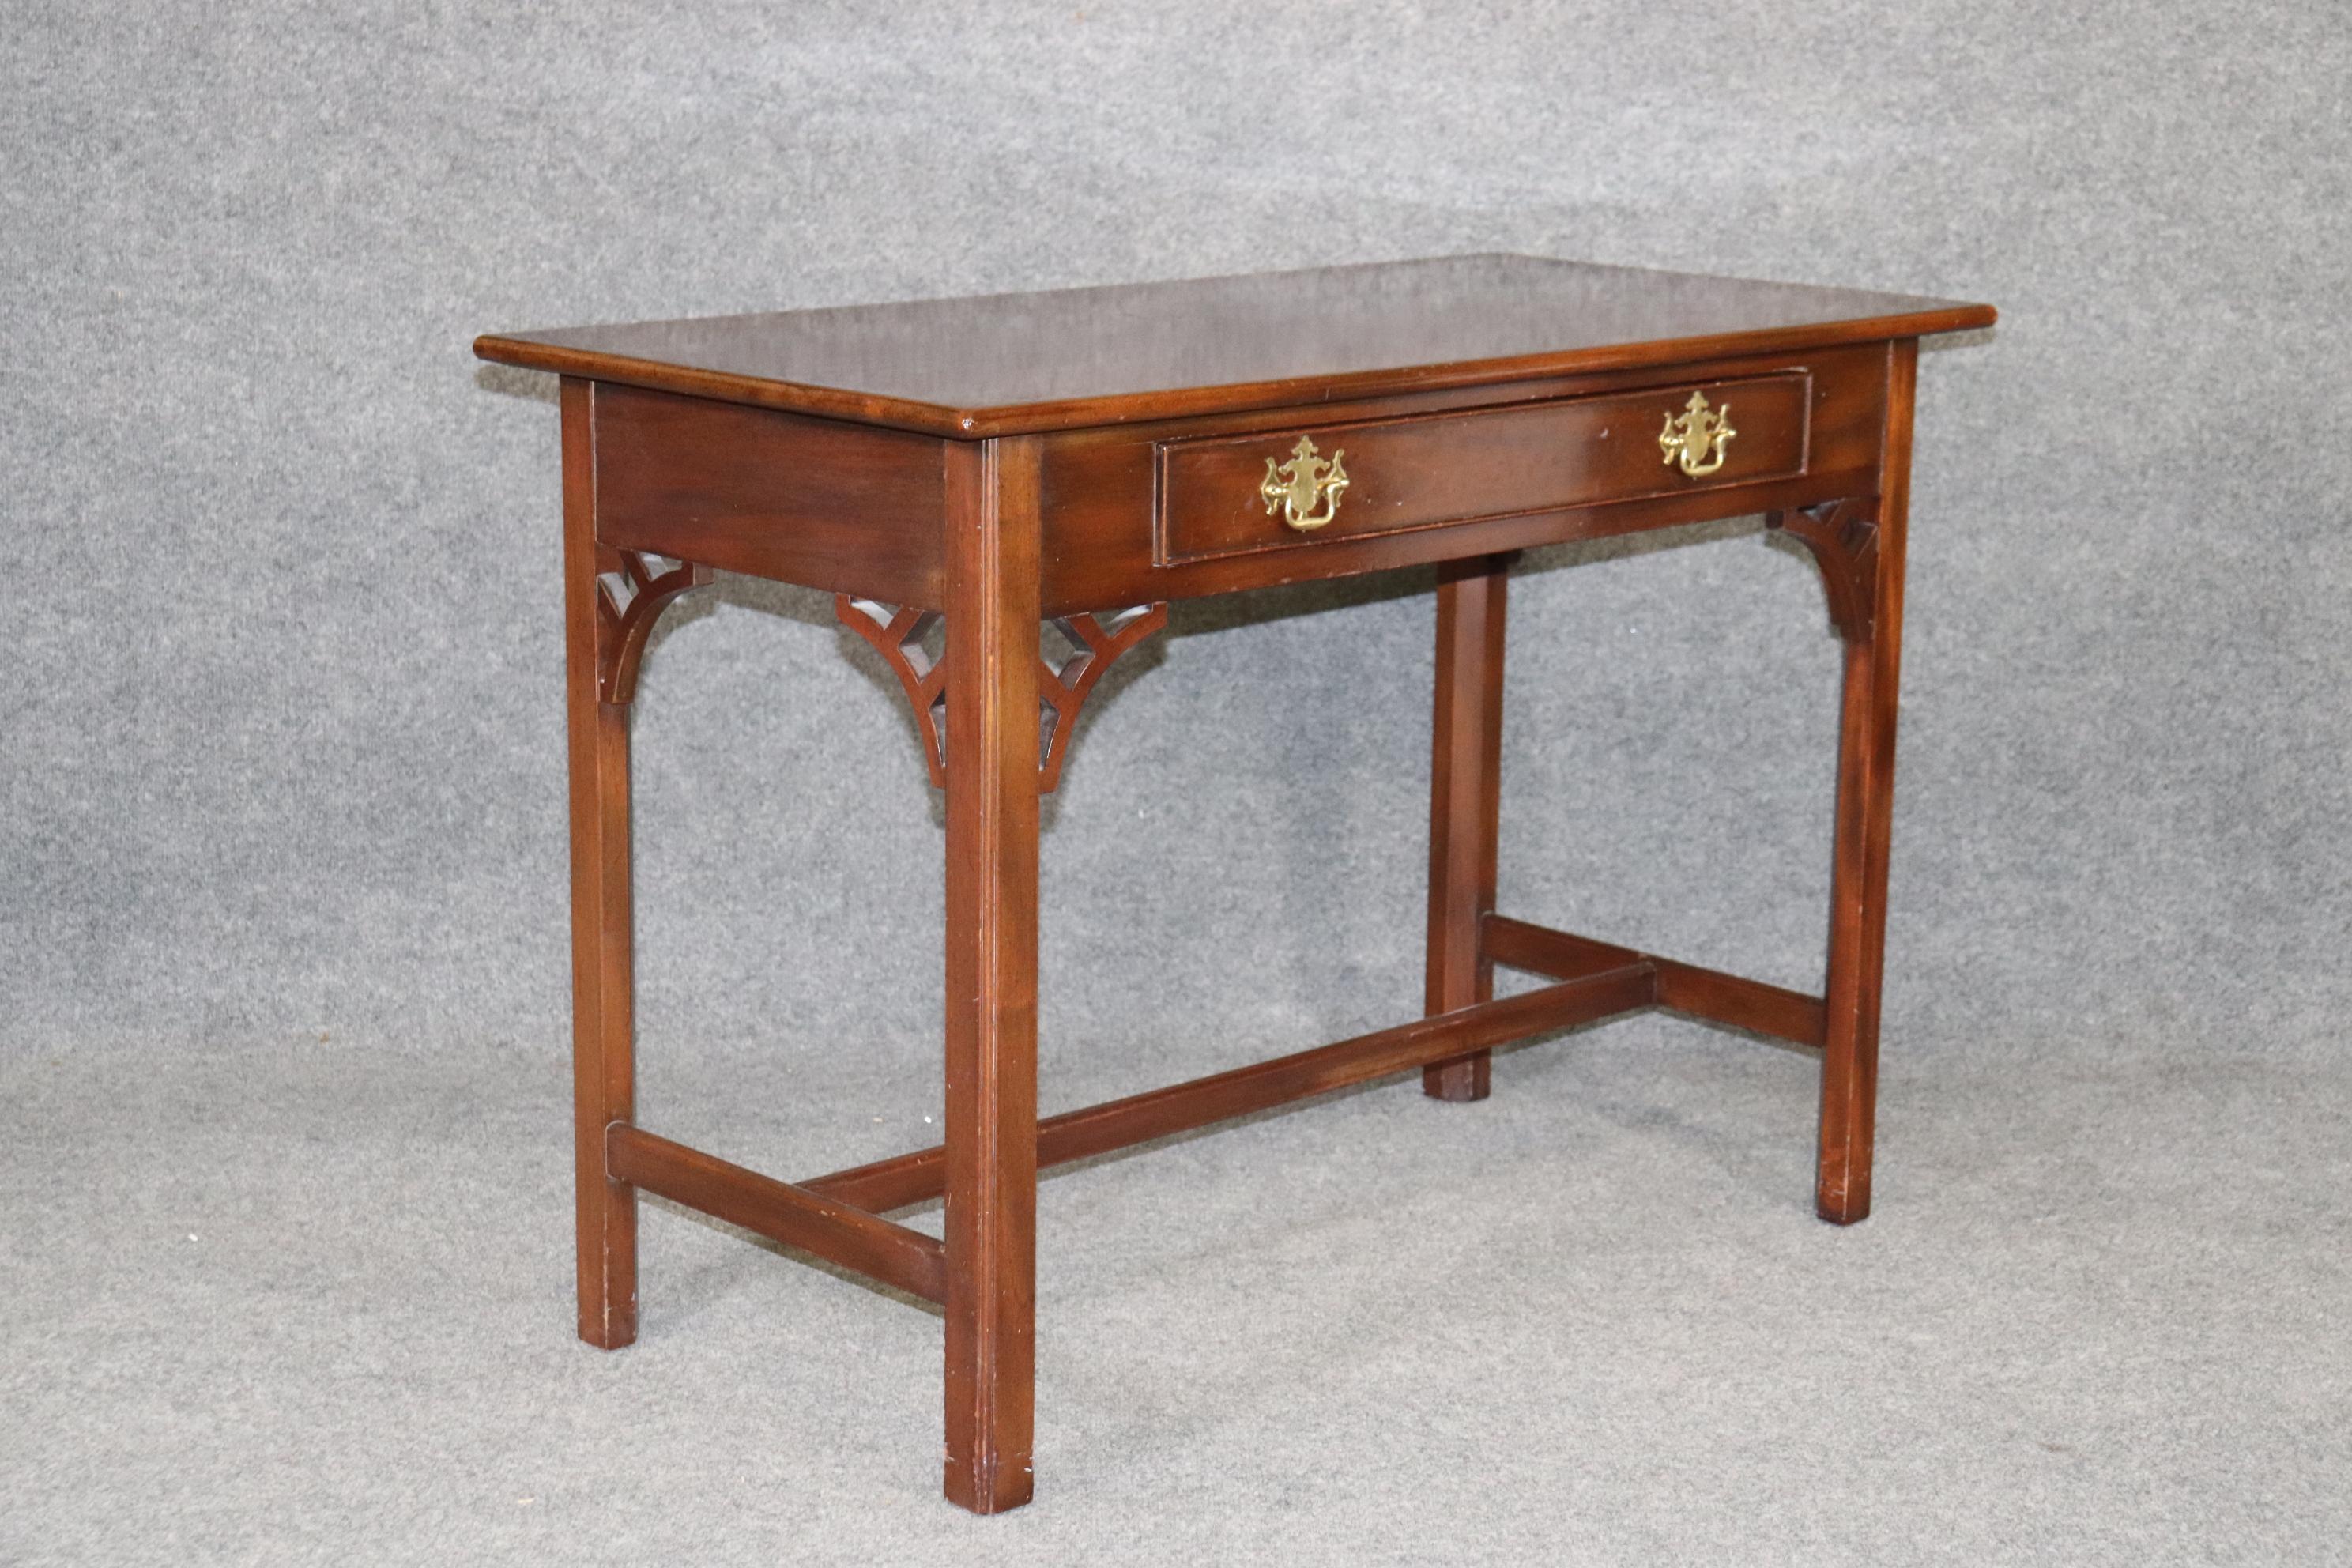 This is a Kittinger Williamsburg collection desk. The desk is in good used condition with minor signs of age and wear as shown.